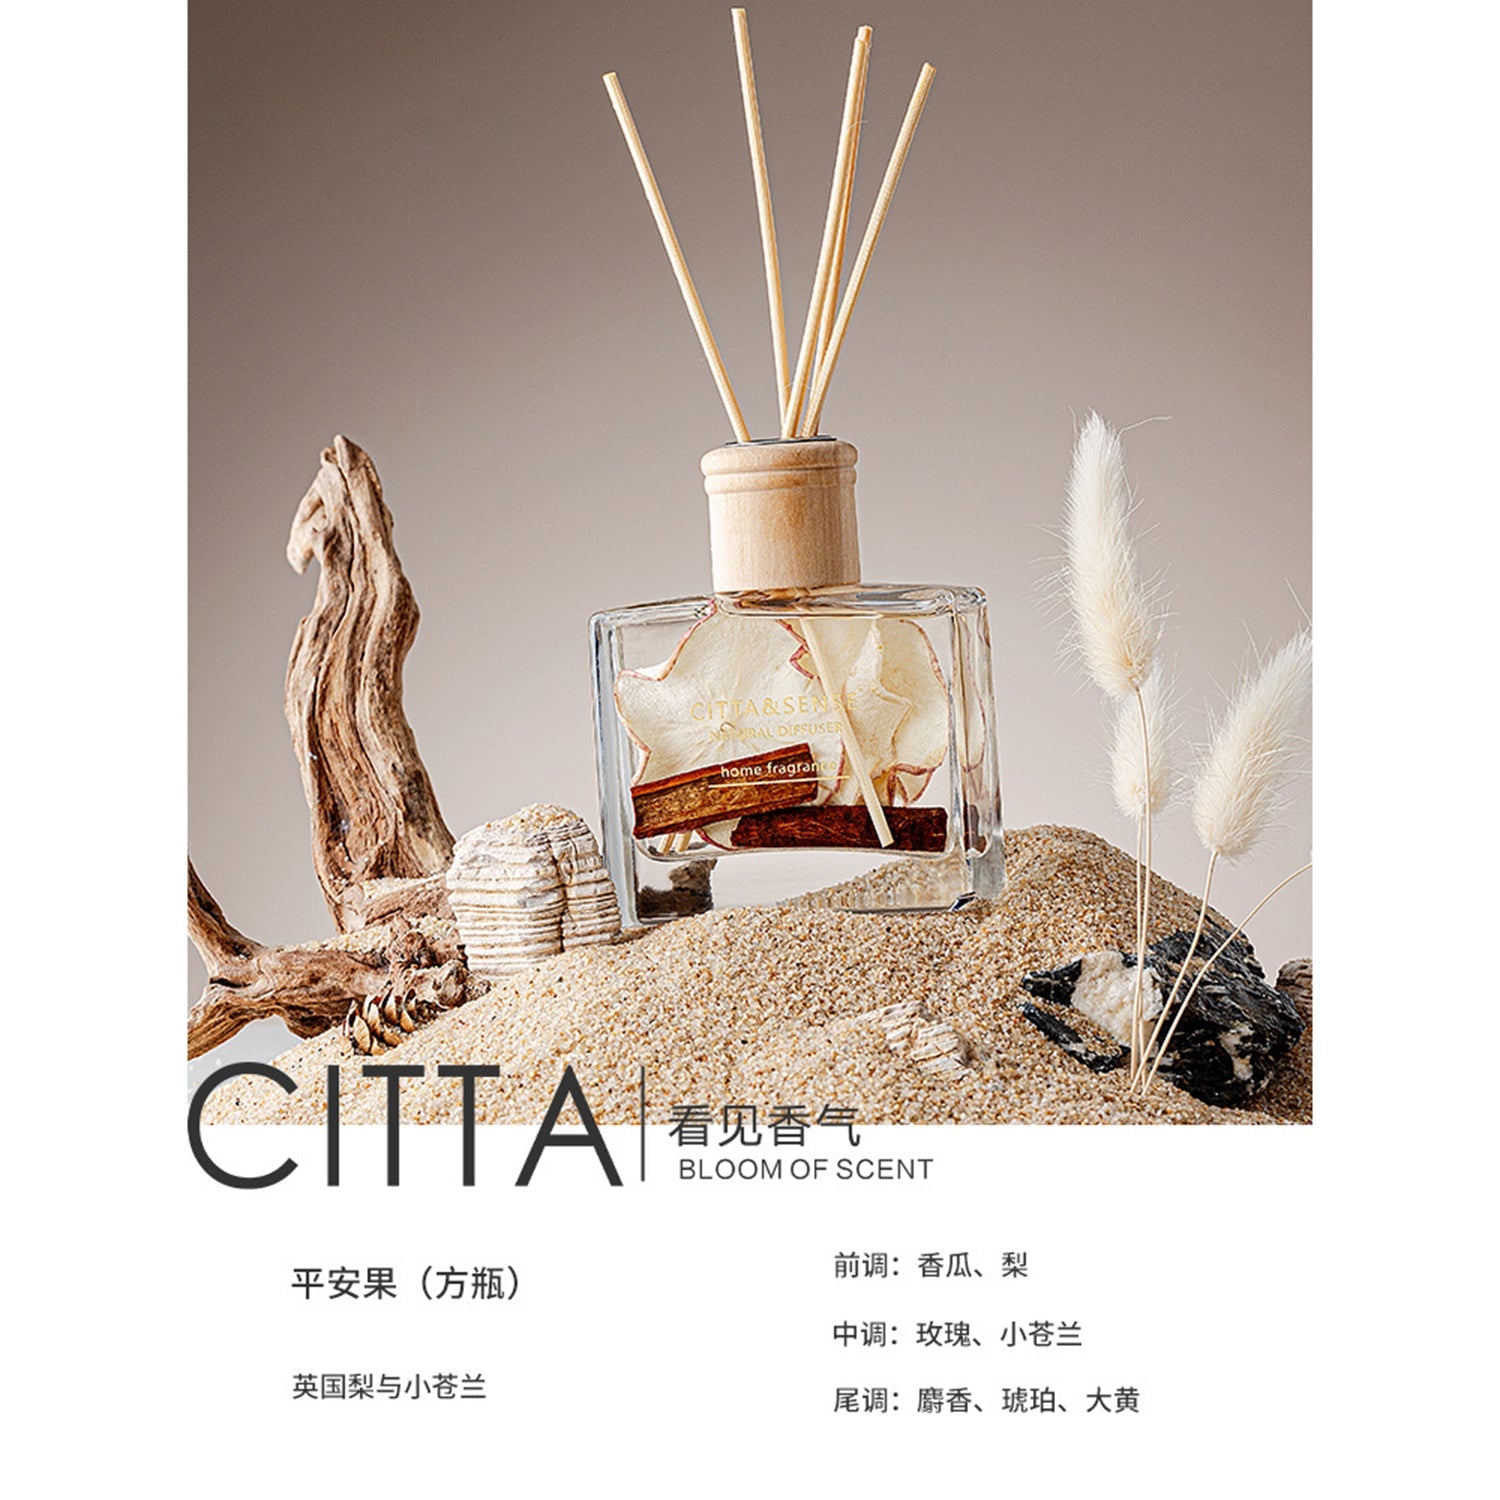 CITTA Fruity Winter Series Reed Diffuser Aromatherapy 120ML Premium Essential Oil with Reed Stick and Dry Fruit Reed Diffuser CITTA Sweet Apple / English Pear & Freesia 